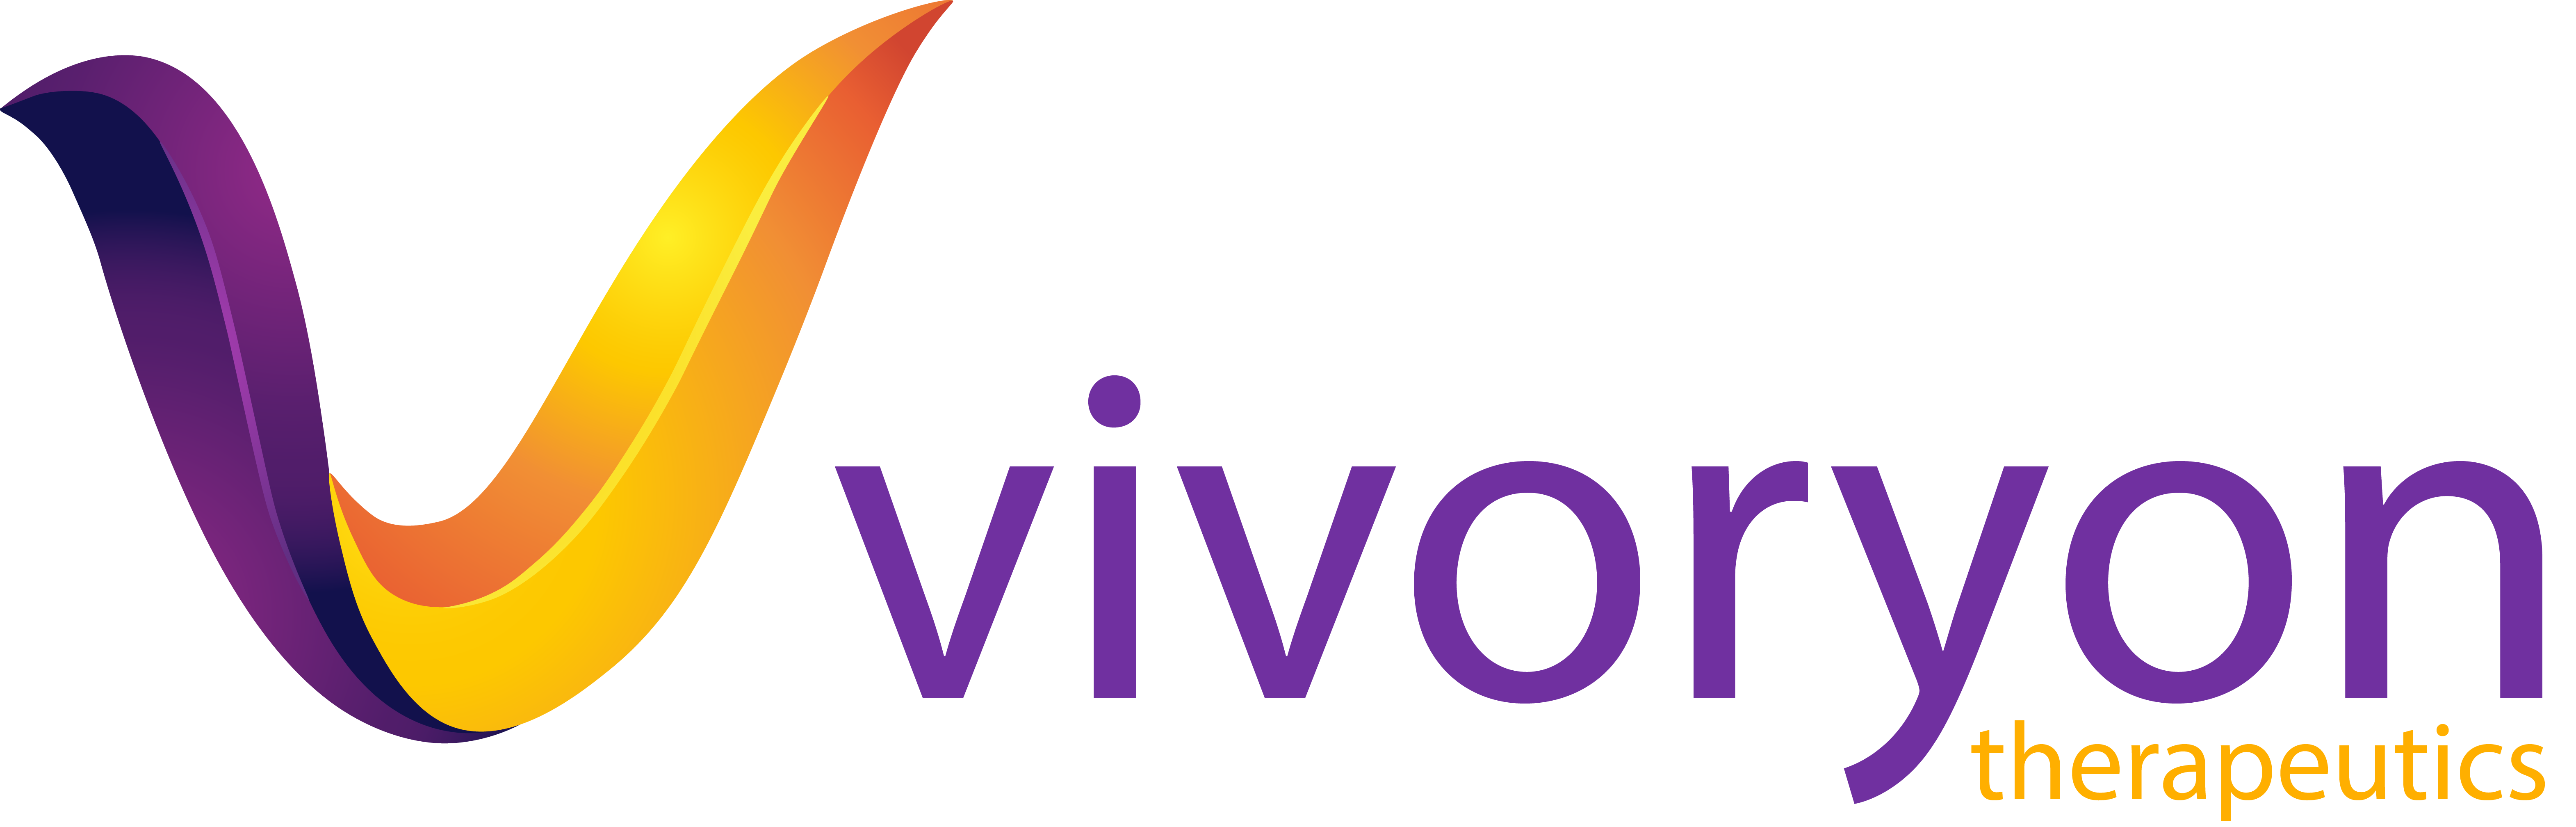 Vivoryon Therapeutics Announces Notice of its Ordinary General Meeting of Shareholders to be Held on September 30, 2020